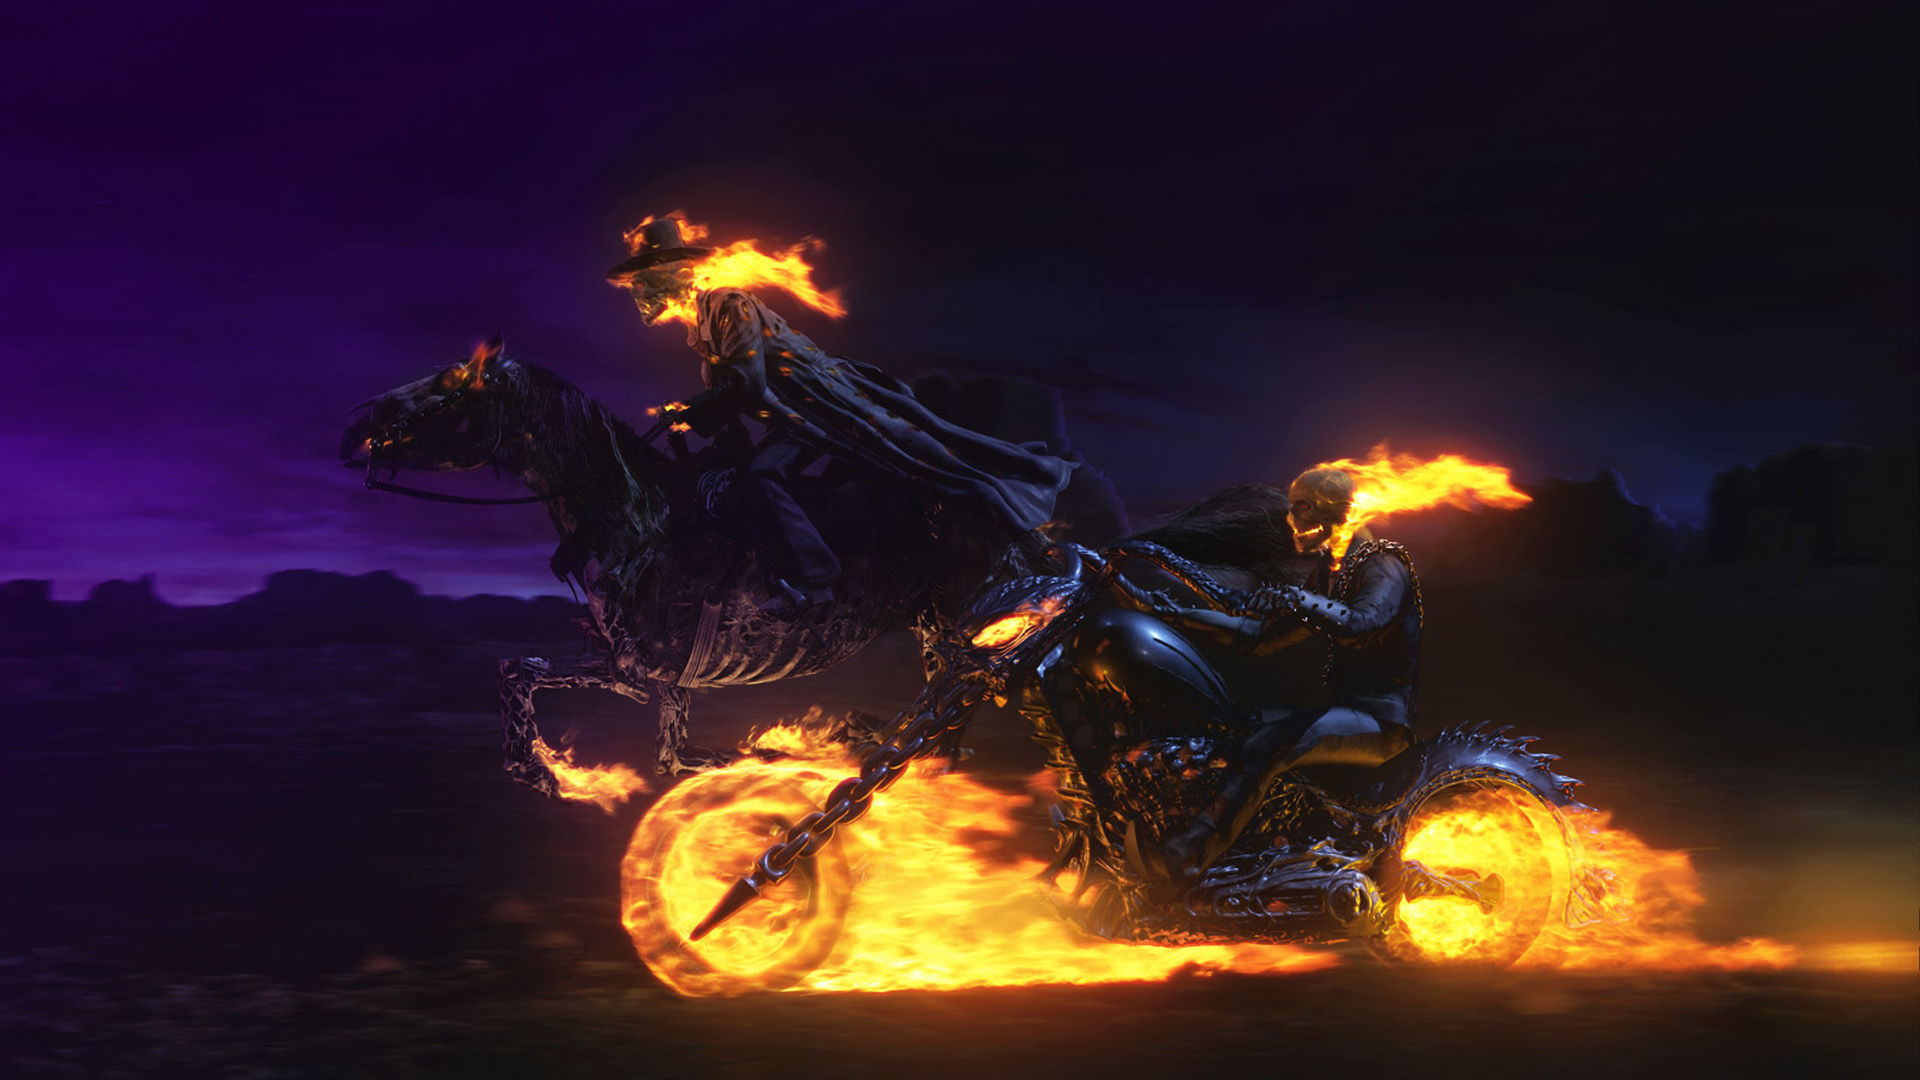 Ghost Rider Wallpaper 1920x1080 Wallpapers 1920x1080 Wallpapers 1920x1080